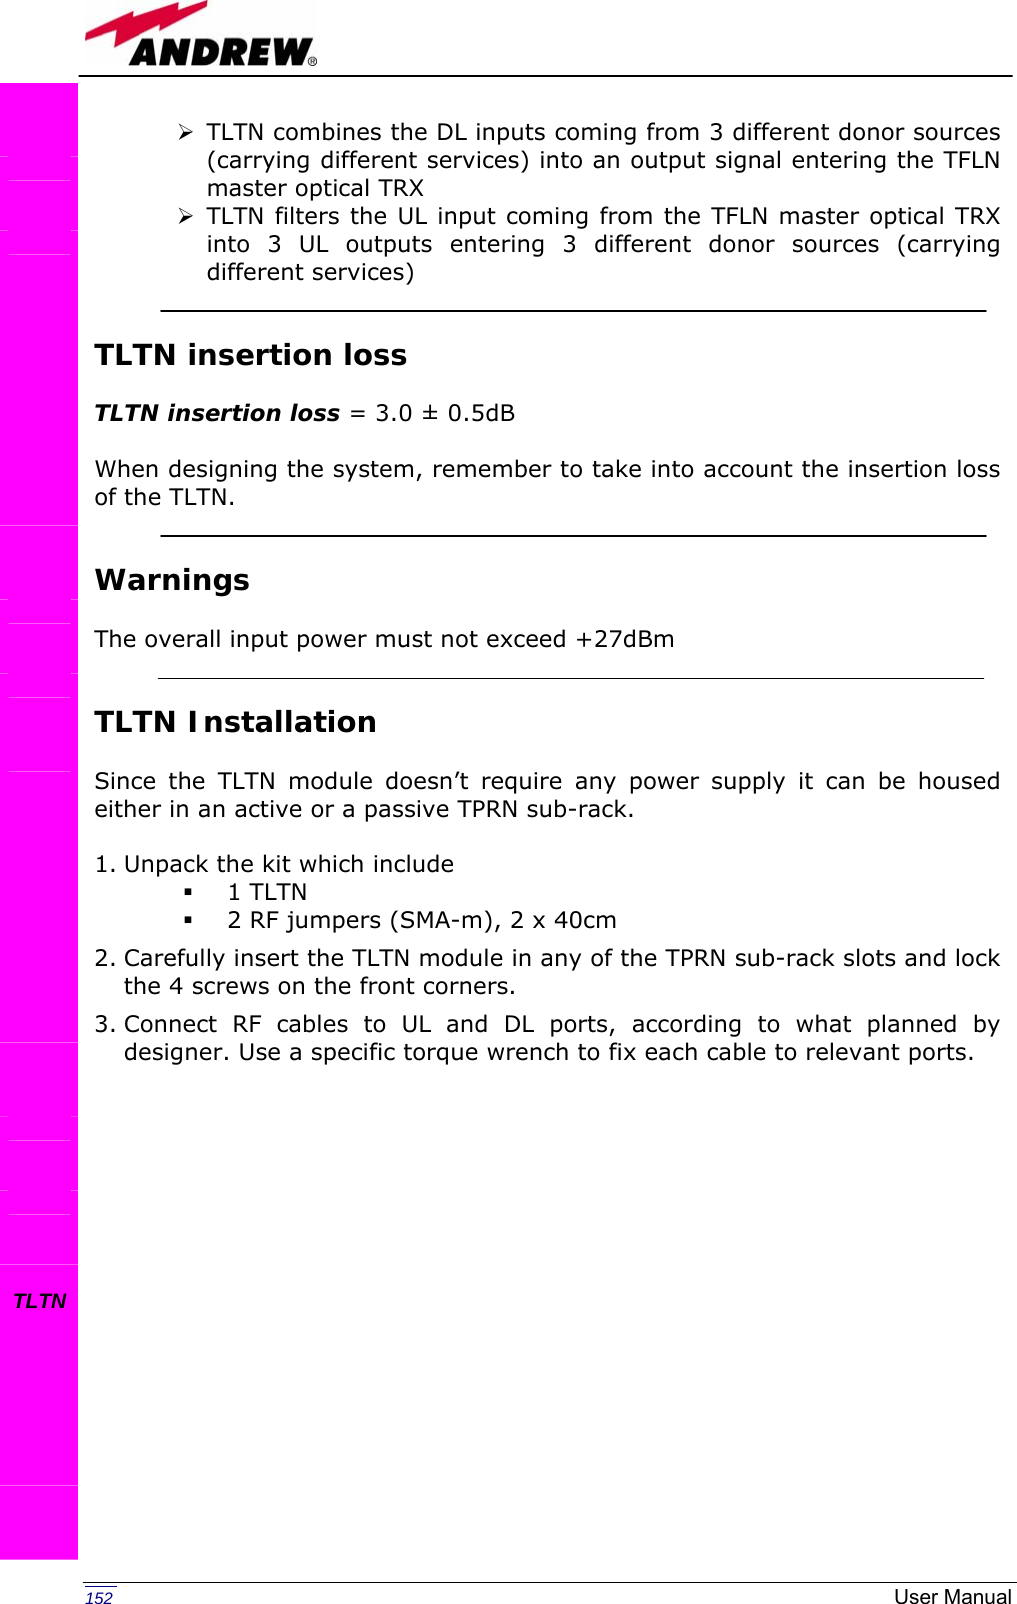   152  User Manual¾ TLTN combines the DL inputs coming from 3 different donor sources (carrying different services) into an output signal entering the TFLN master optical TRX ¾ TLTN filters the UL input coming from the TFLN master optical TRX into 3 UL outputs entering 3 different donor sources (carrying different services)   TLTN insertion loss   TLTN insertion loss = 3.0 ± 0.5dB   When designing the system, remember to take into account the insertion loss of the TLTN.   Warnings  The overall input power must not exceed +27dBm   TLTN Installation  Since the TLTN module doesn’t require any power supply it can be housed either in an active or a passive TPRN sub-rack.  1. Unpack the kit which include  1 TLTN  2 RF jumpers (SMA-m), 2 x 40cm 2. Carefully insert the TLTN module in any of the TPRN sub-rack slots and lock the 4 screws on the front corners. 3. Connect RF cables to UL and DL ports, according to what planned by designer. Use a specific torque wrench to fix each cable to relevant ports.                 TLTN    